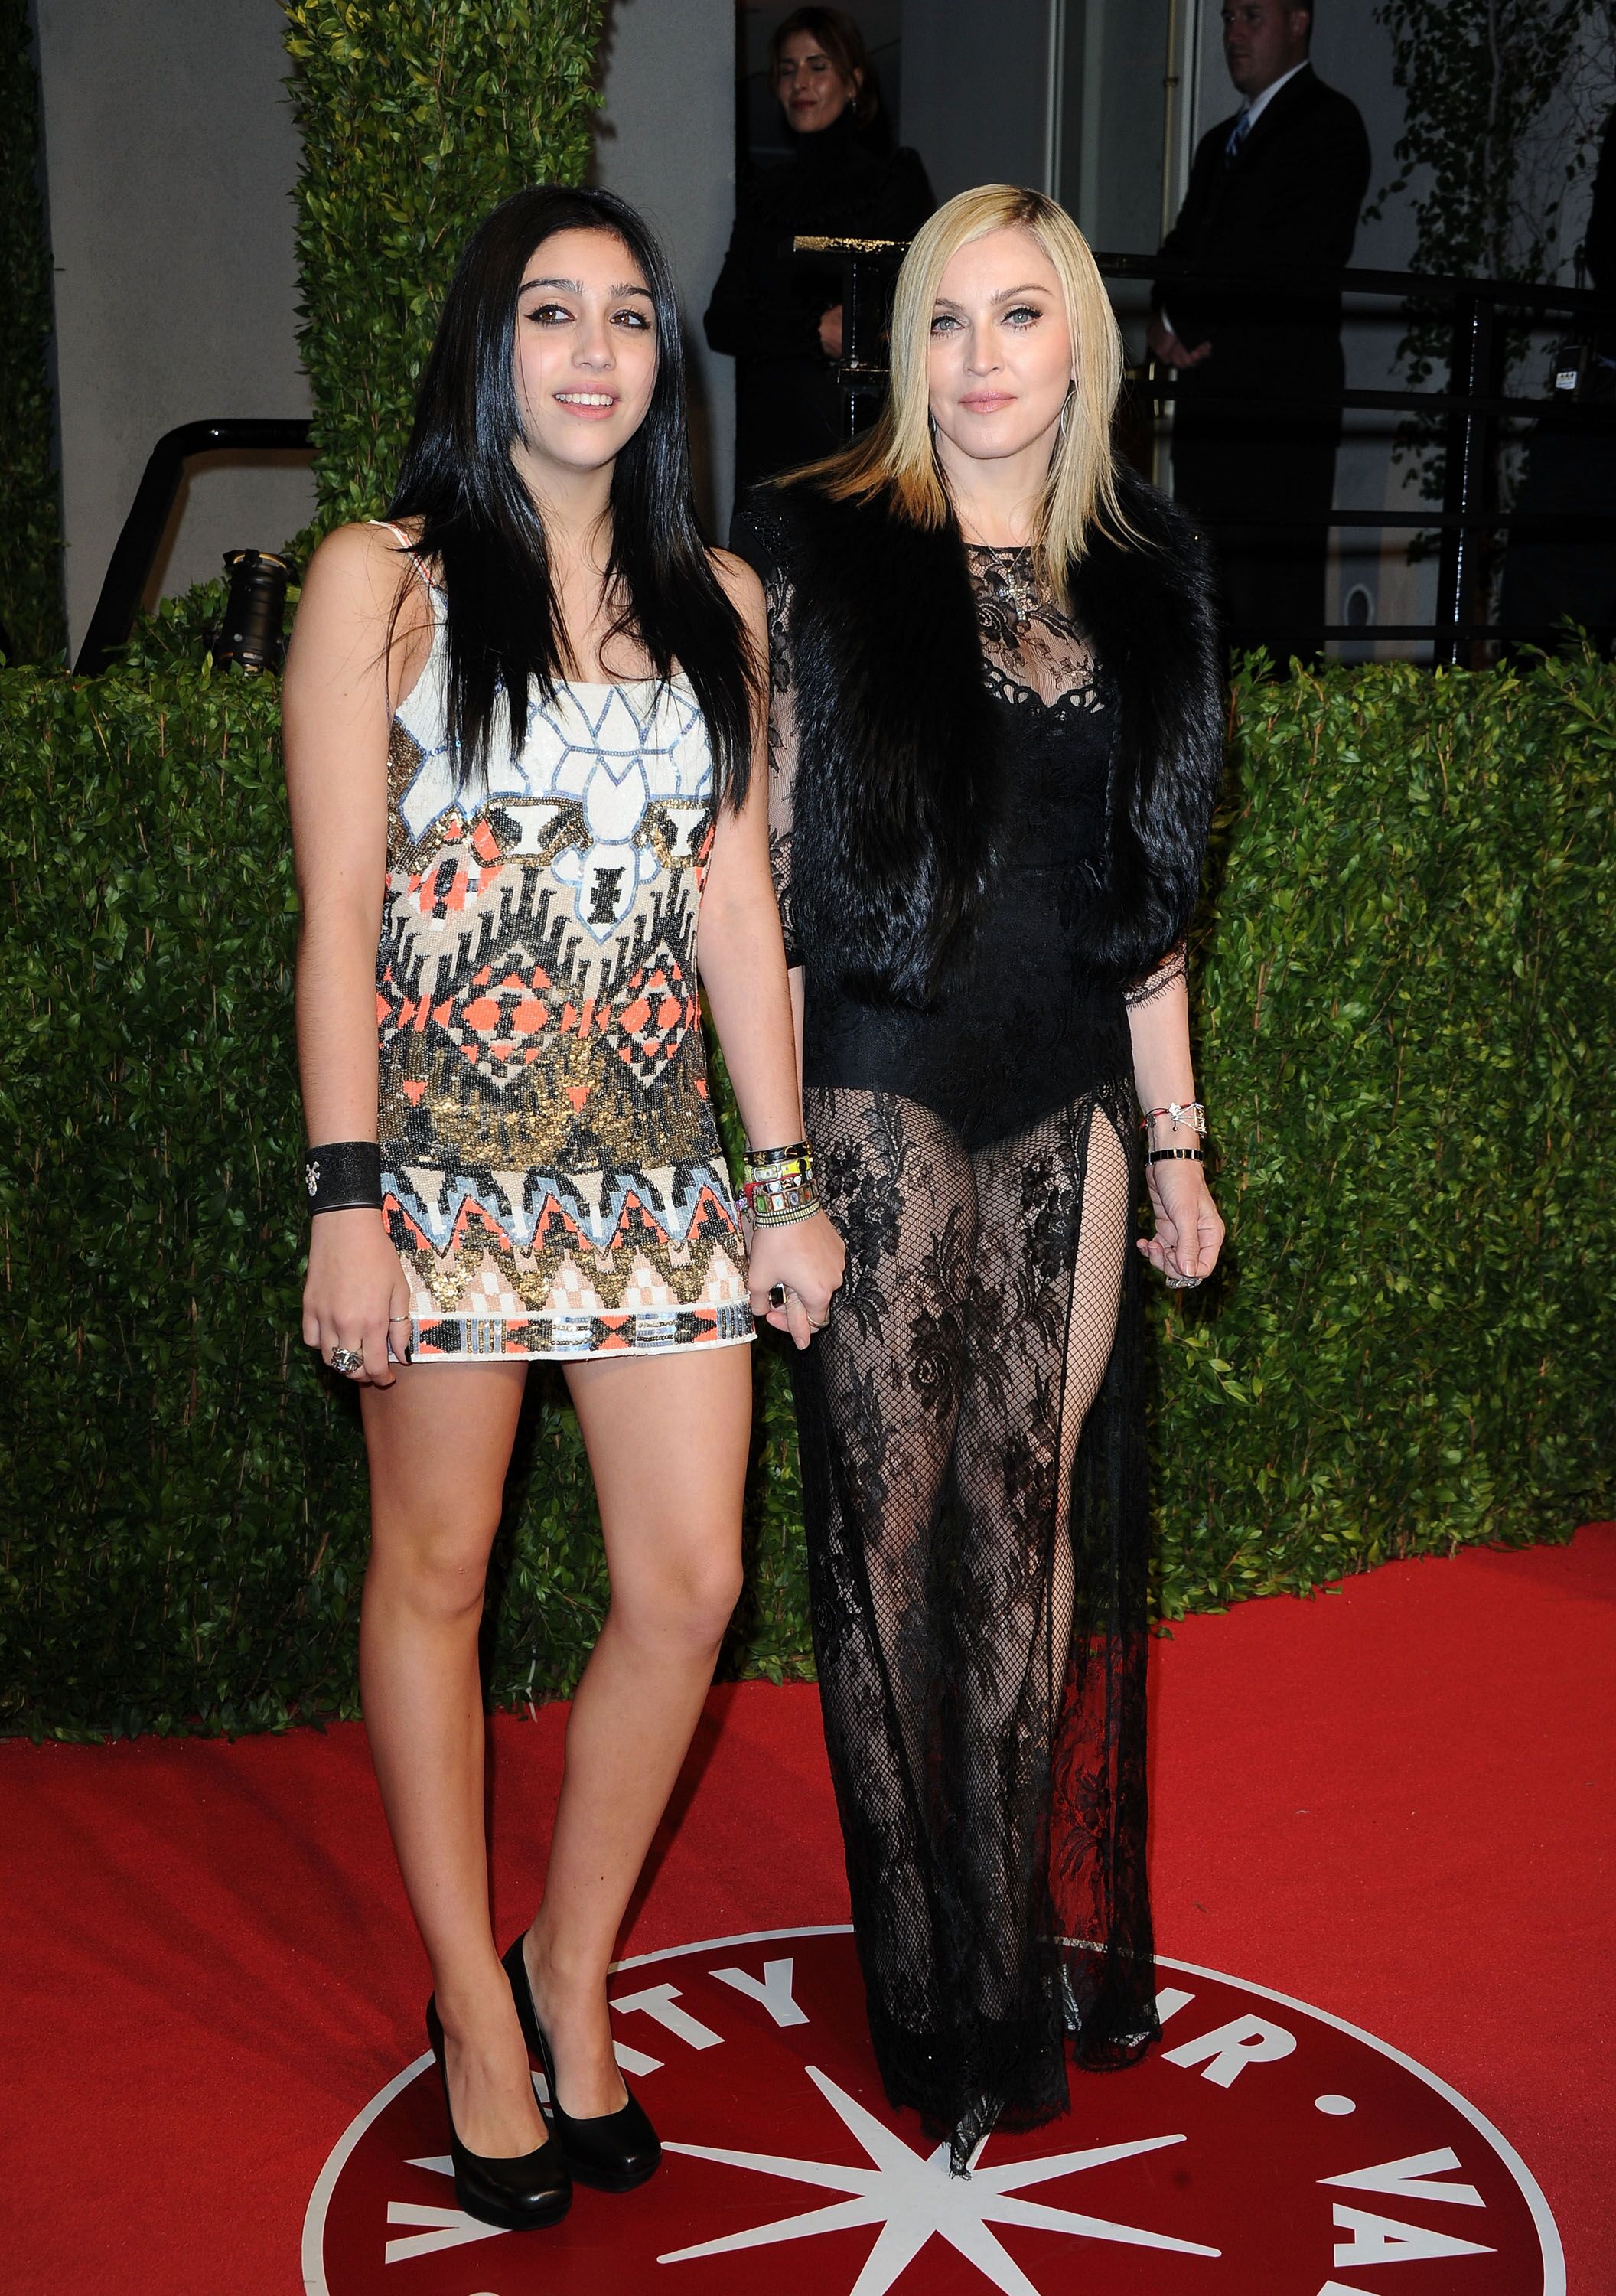 Lourdes Leon and Madonna arrive at the Vanity Fair Oscar party hosted by Graydon Carter. | Source: Getty Images